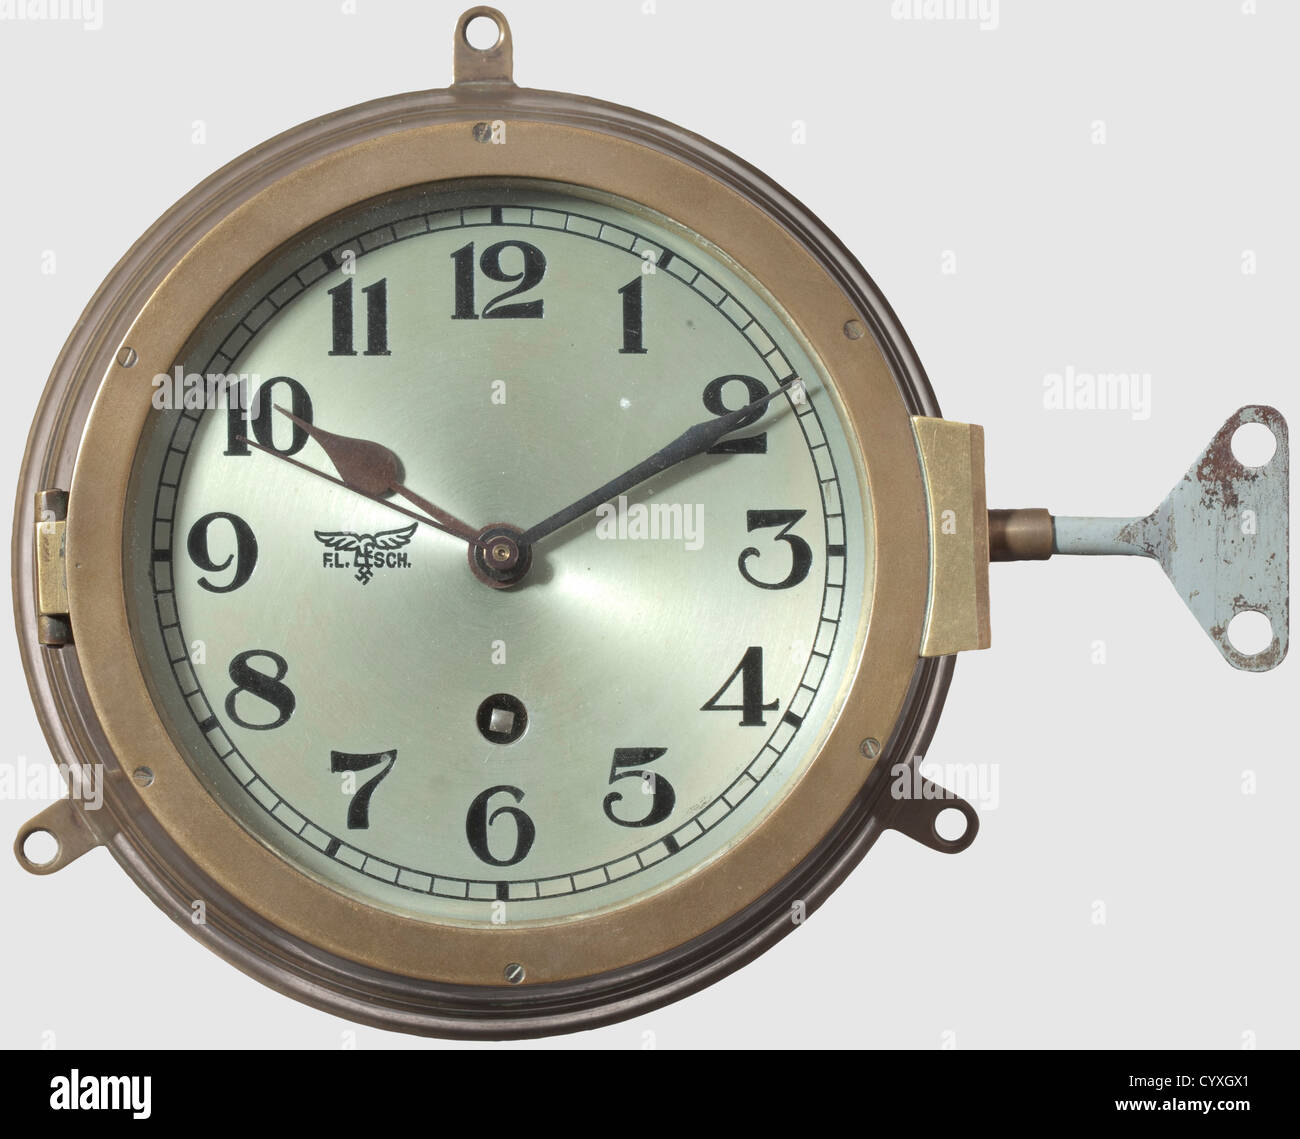 A Luftwaffe wall clock,from a fire control ship of the Flak artillery Brass case,black stamped numerals,blued hands,glass cover. The face of the clock has the Luftwaffe eagle and abbreviation 'F.L.Sch.'(Feuerleitschiff,tr. fire control ship). Made by Kieninger & Obergfell. Diameter 20 cm. Complete with key. Still functional. Very rare. Cf. Knirim,Uhren(Clocks),p. 313,historic,historical,1930s,1930s,20th century,Air Force,branch of service,branches of service,armed service,armed services,military,militaria,air forces,object,objects,still,Additional-Rights-Clearences-Not Available Stock Photo